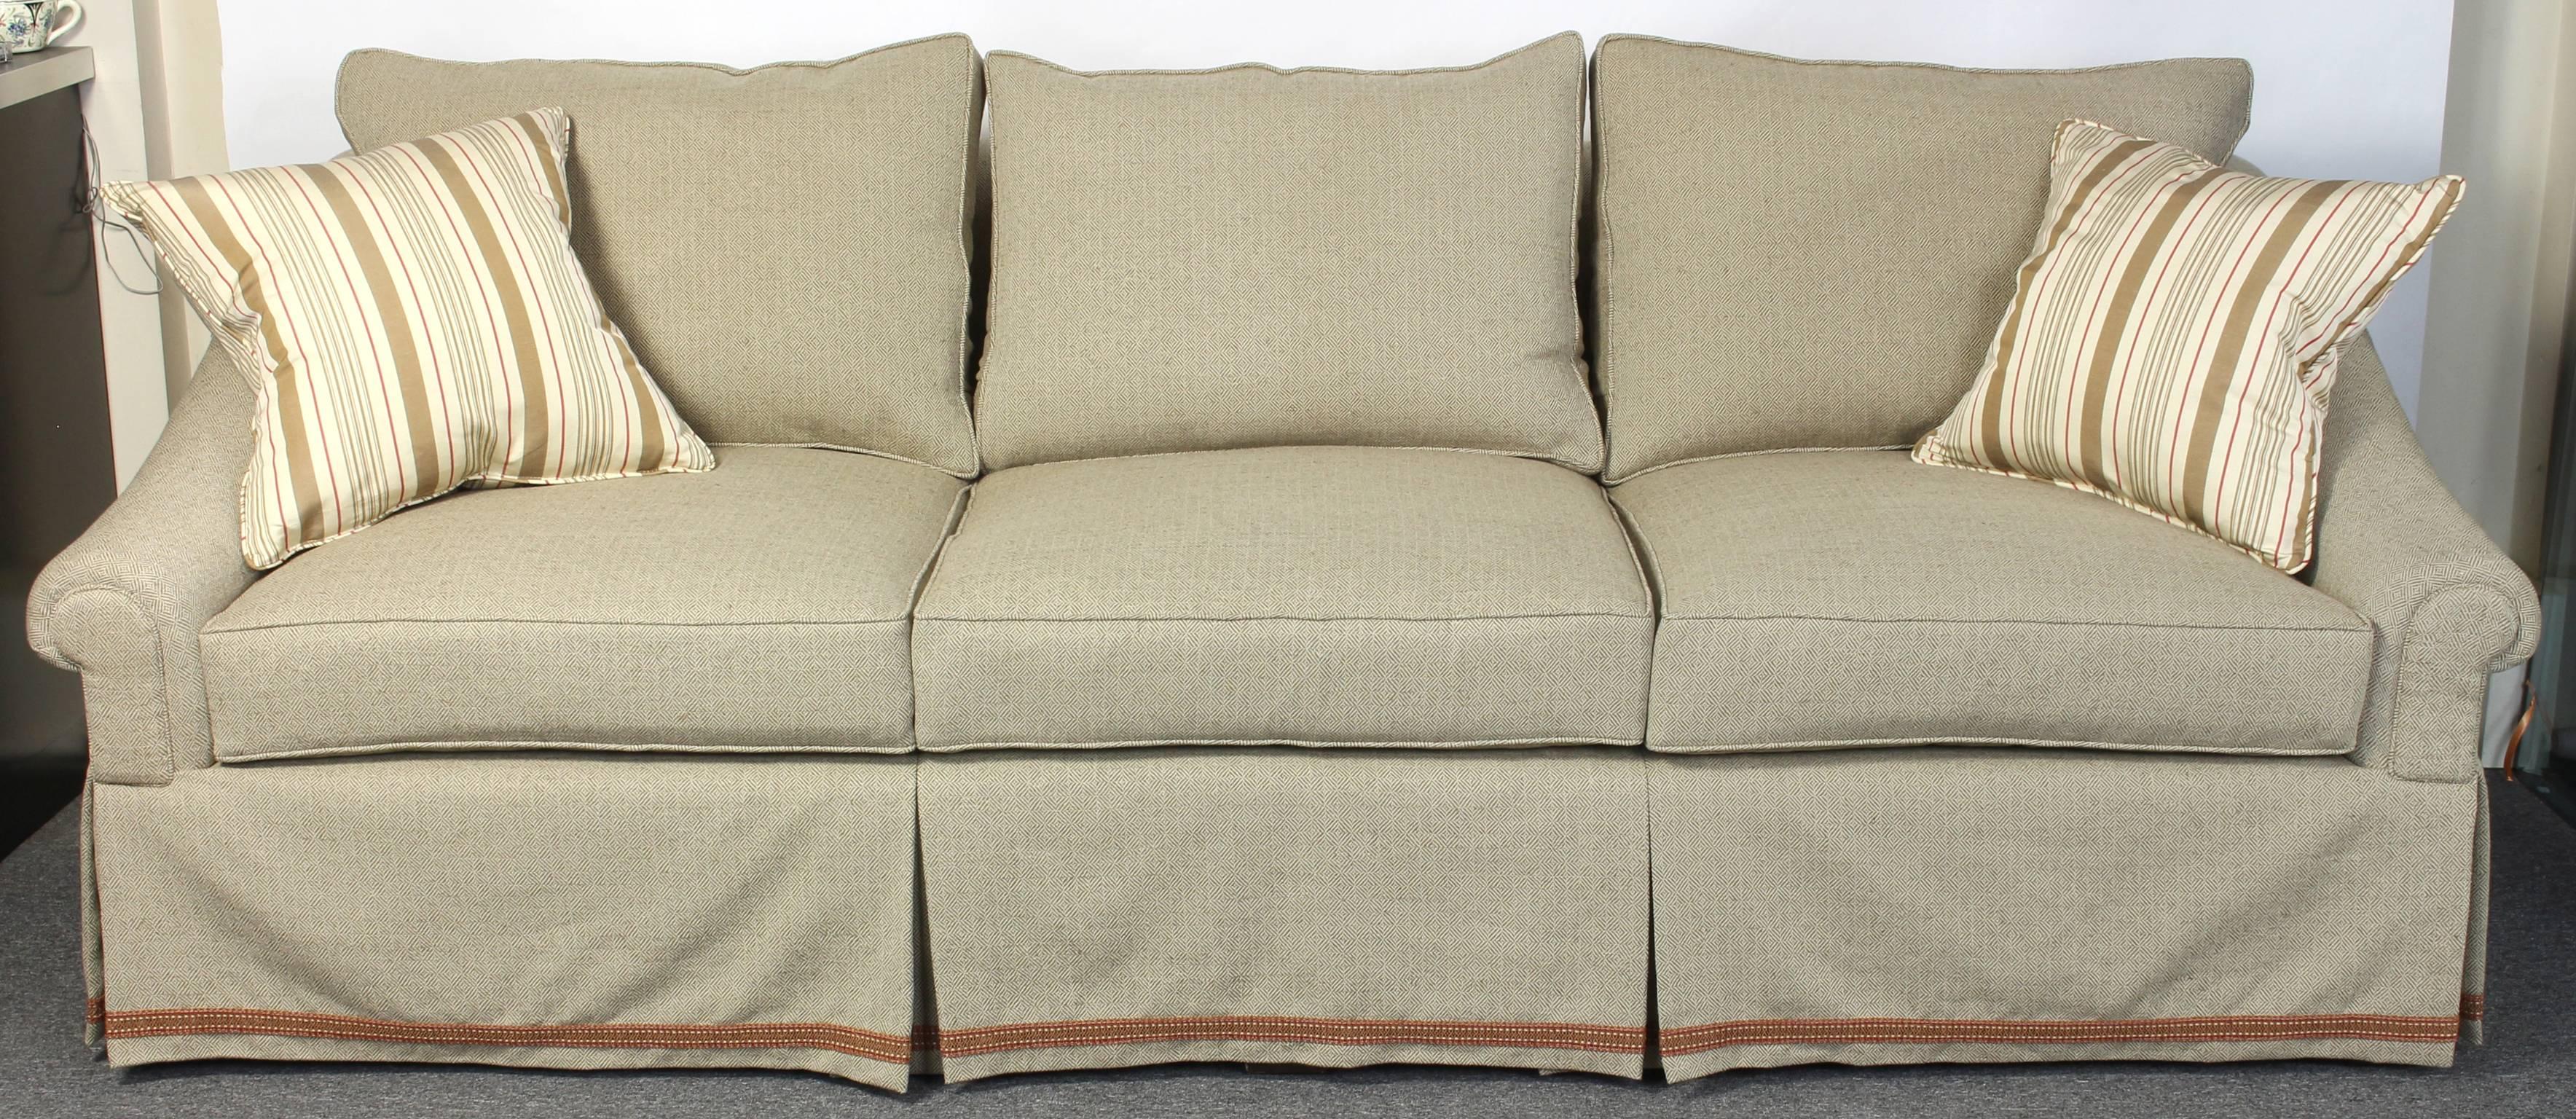 A large custom designed and fabricated three-seater sofa newly upholstered in a neutral woven cotton fabric with three optional back cushions and six additional 20